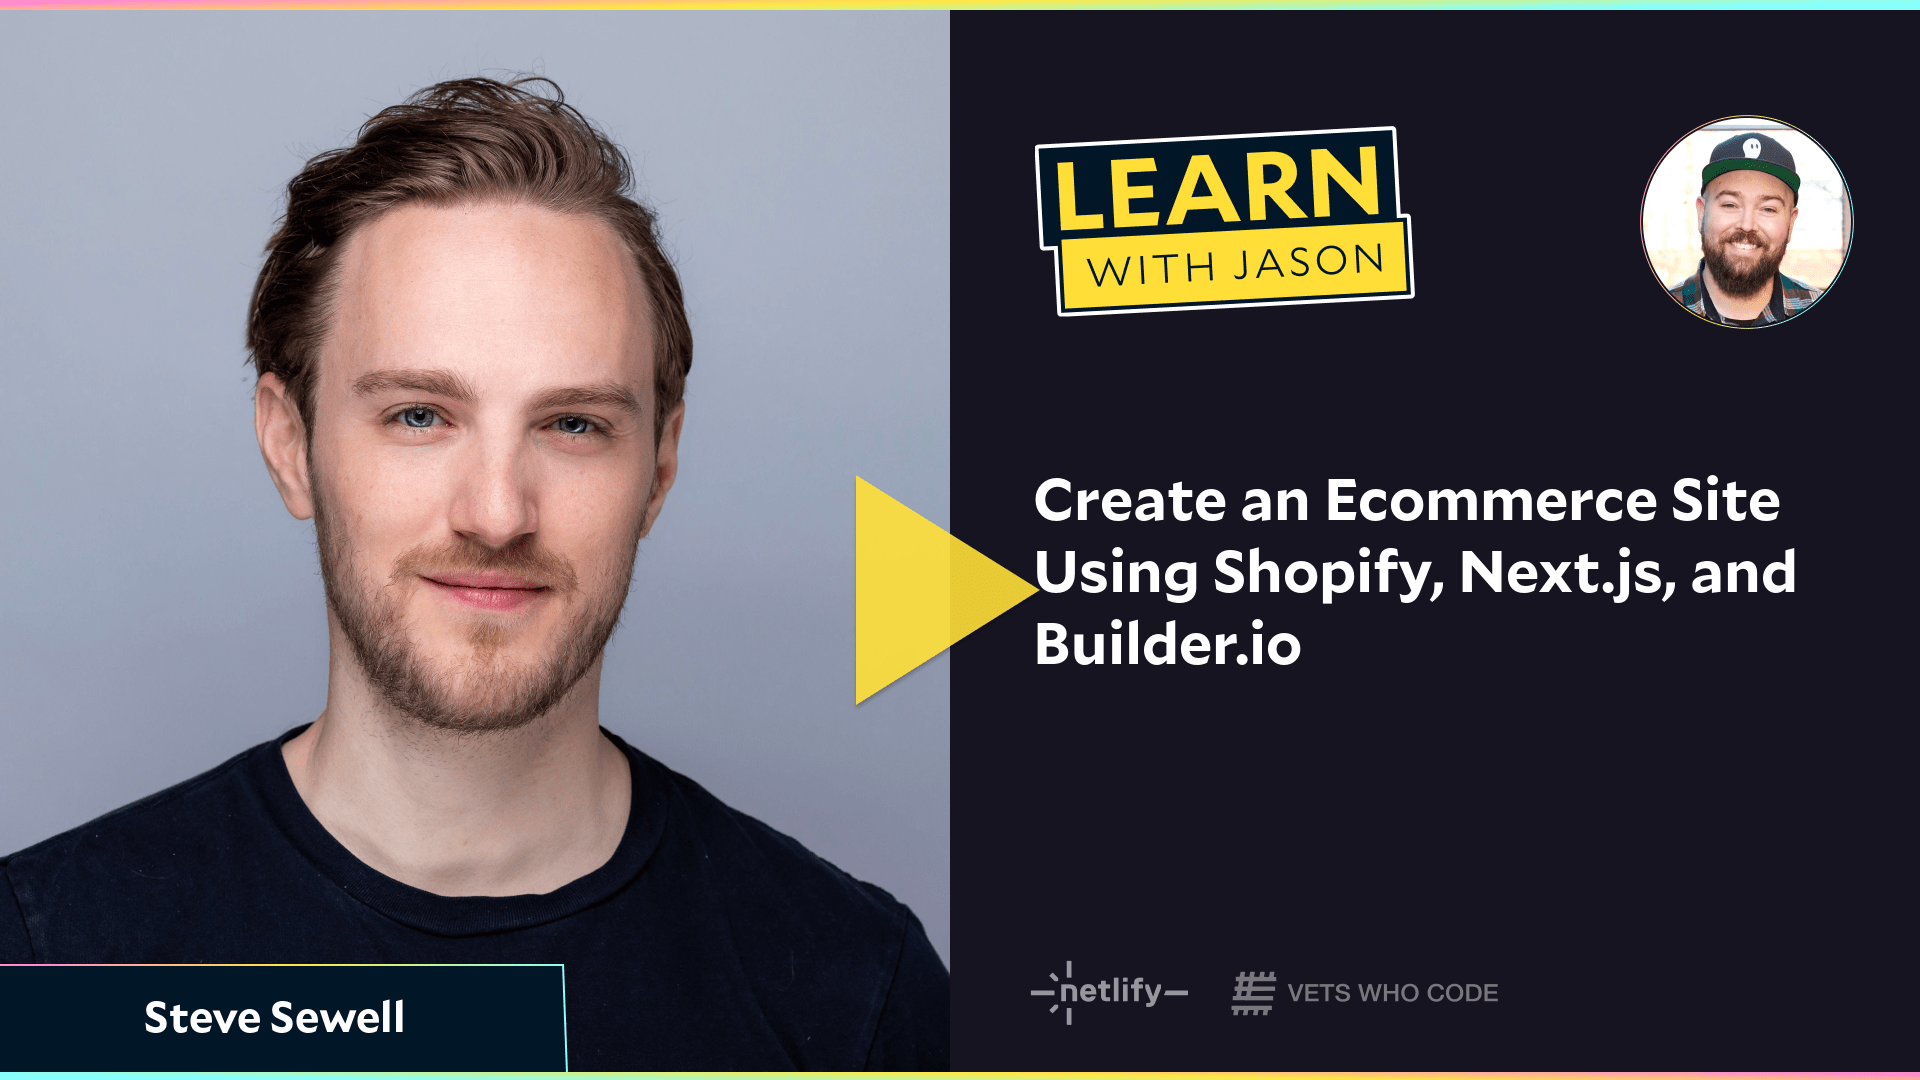 Create an Ecommerce Site Using Shopify, Next.js, and Builder.io (with Steve Sewell)